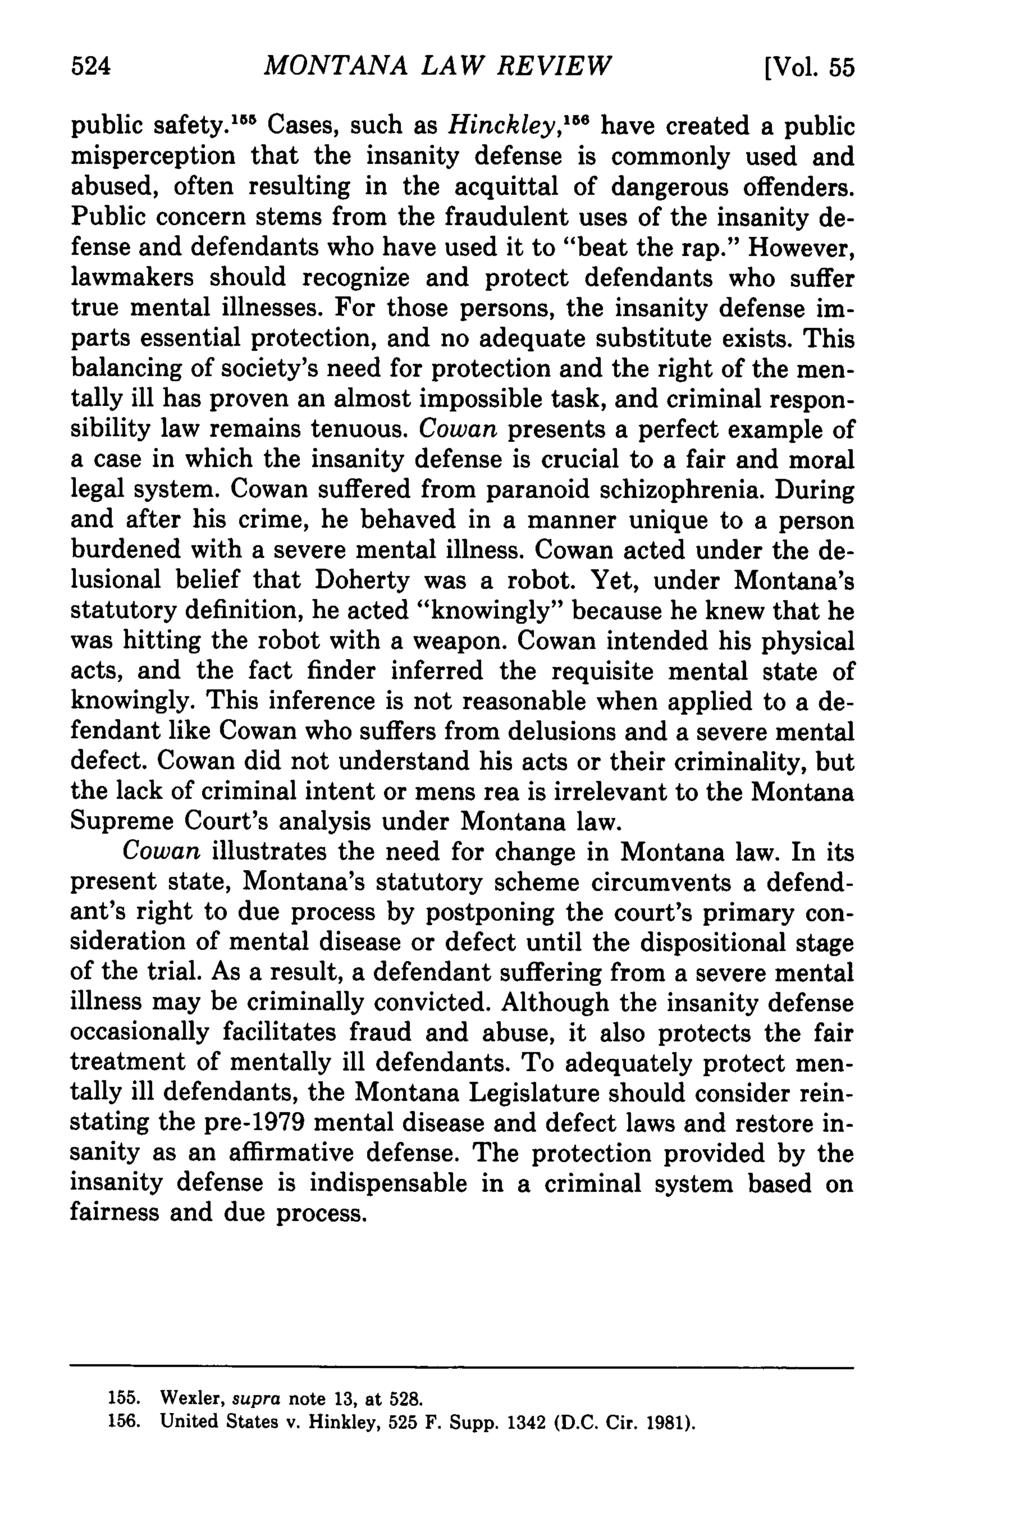 Montana MONTANA Law Review, LAW Vol. REVIEW 55 [1994], Iss. 2, Art. 12 [Vol. 55 public safety.